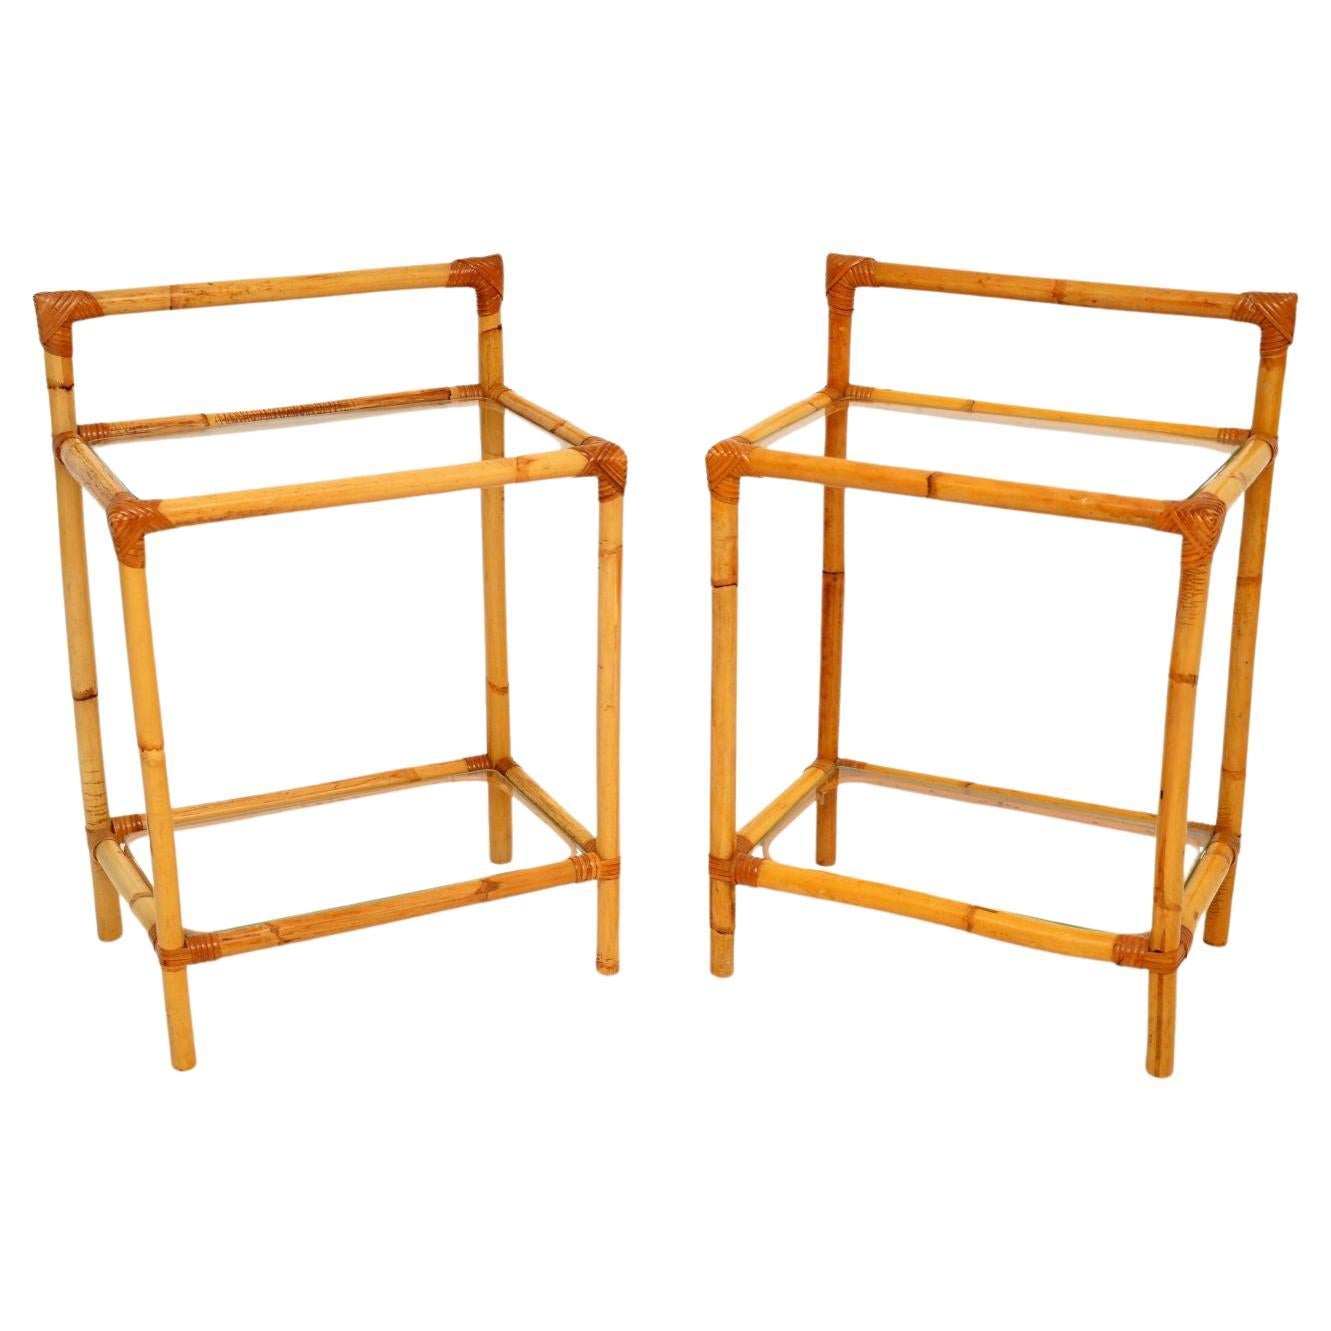 1970's Pair of Vintage Bamboo Side Tables by Angraves